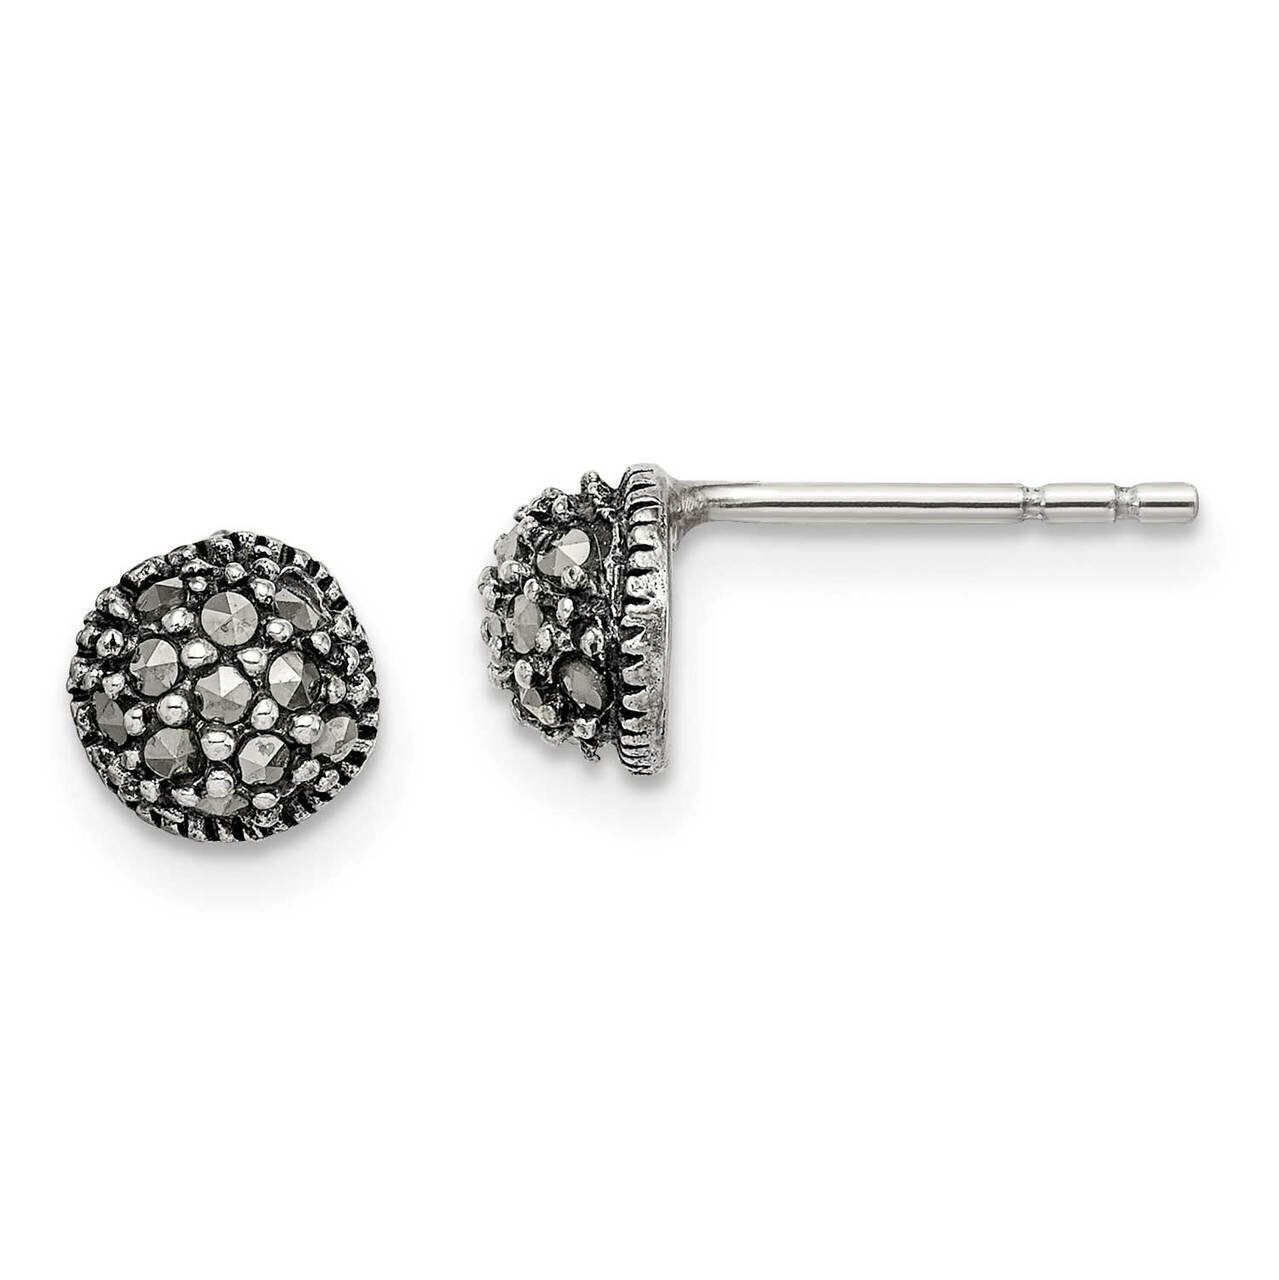 Marcasite 6mm Button Post Earrings Sterling Silver Antiqued QE15053